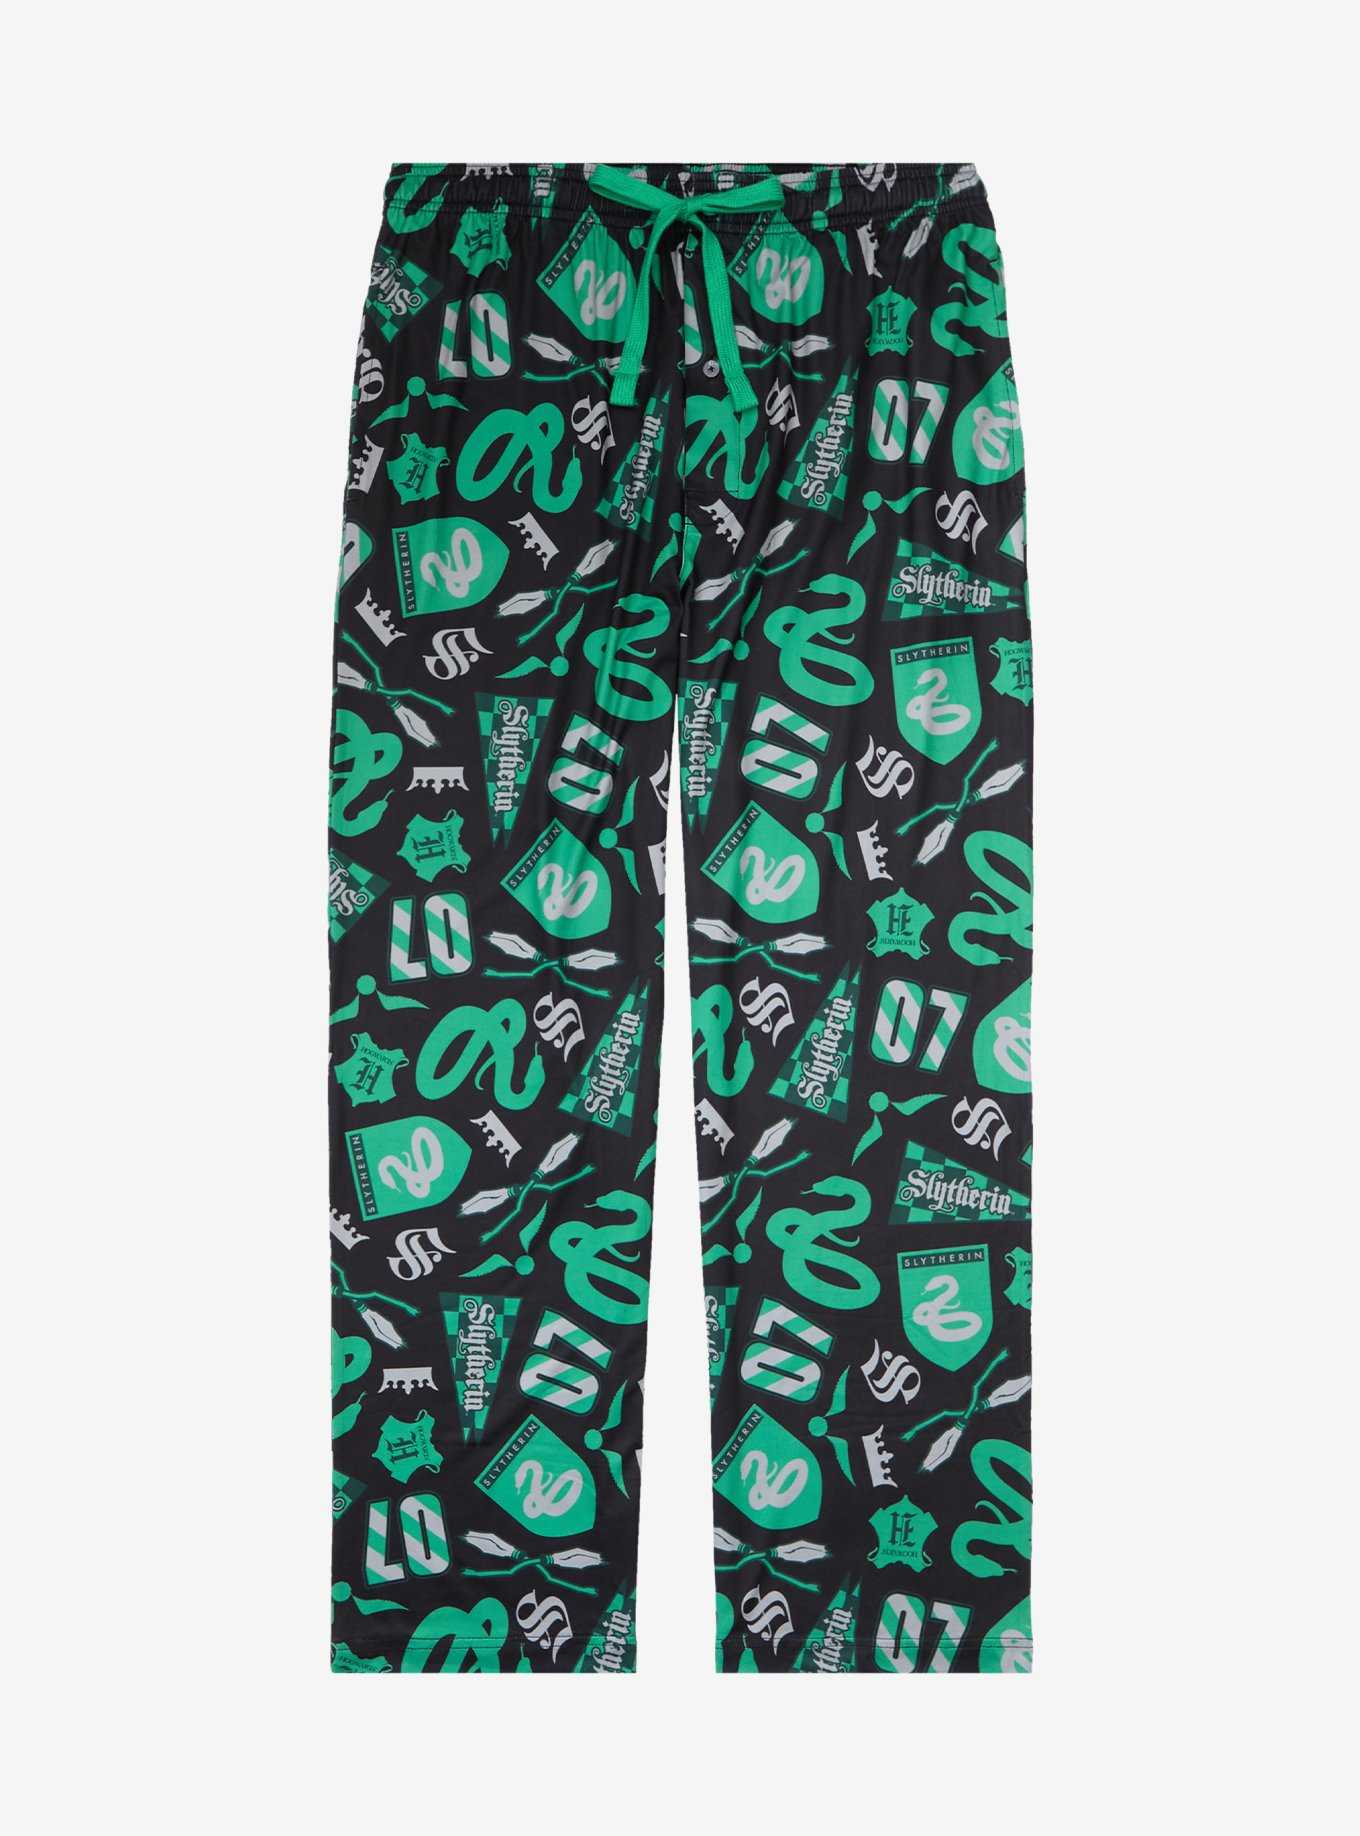 Harry Potter Slytherin Quidditch Allover Print Plus Size Sleep Pants - BoxLunch Exclusive, , hi-res